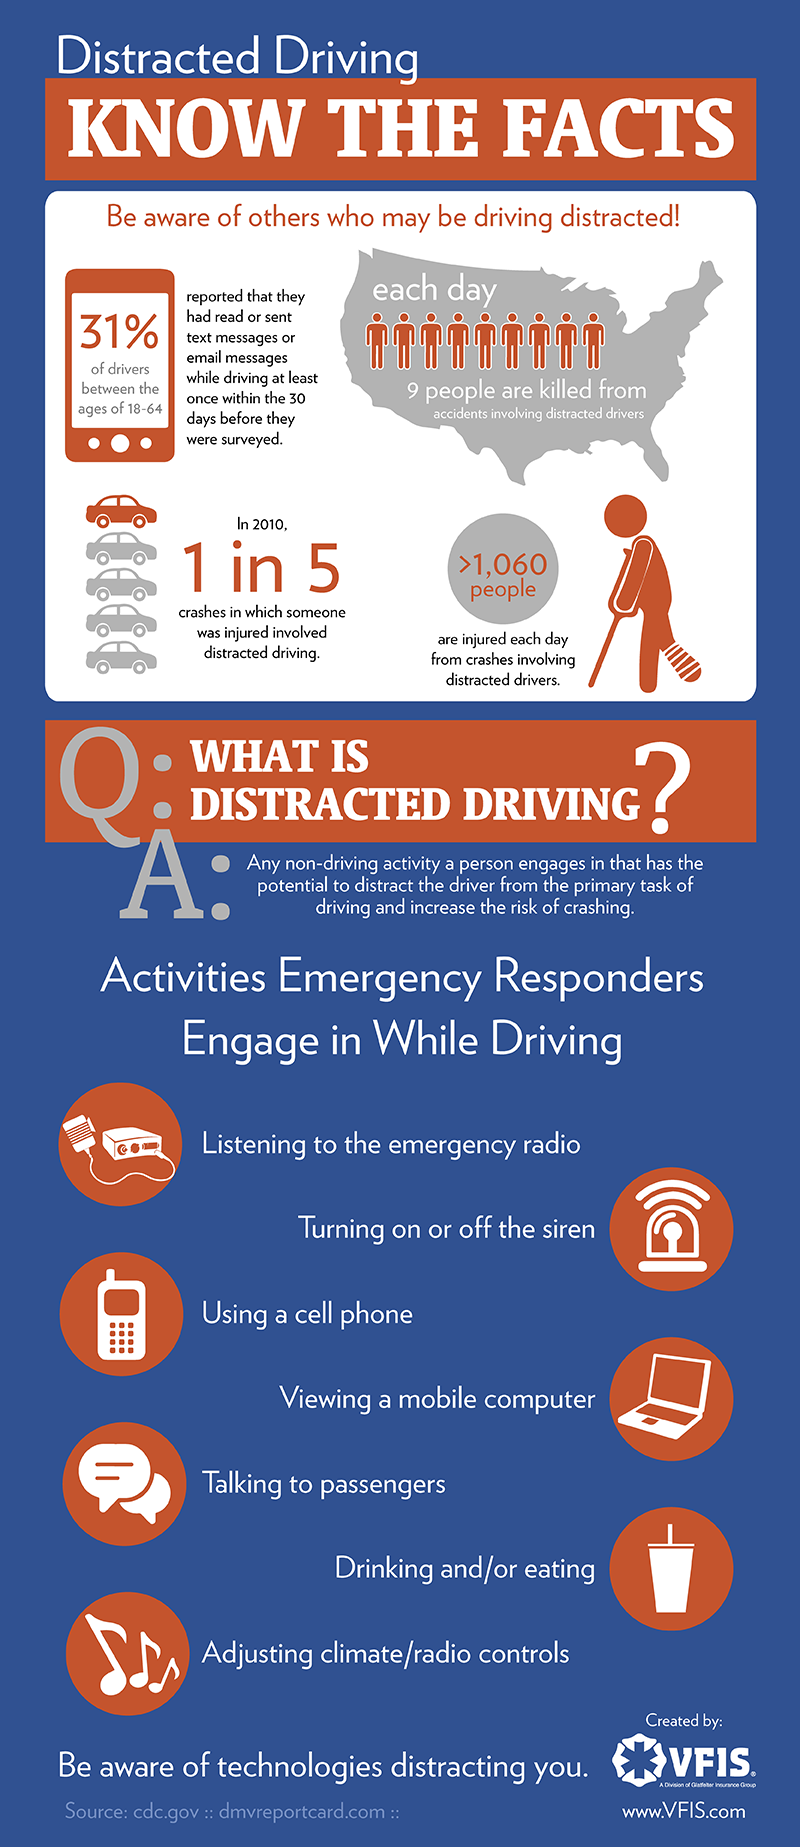 Distracted Driving: Know the facts